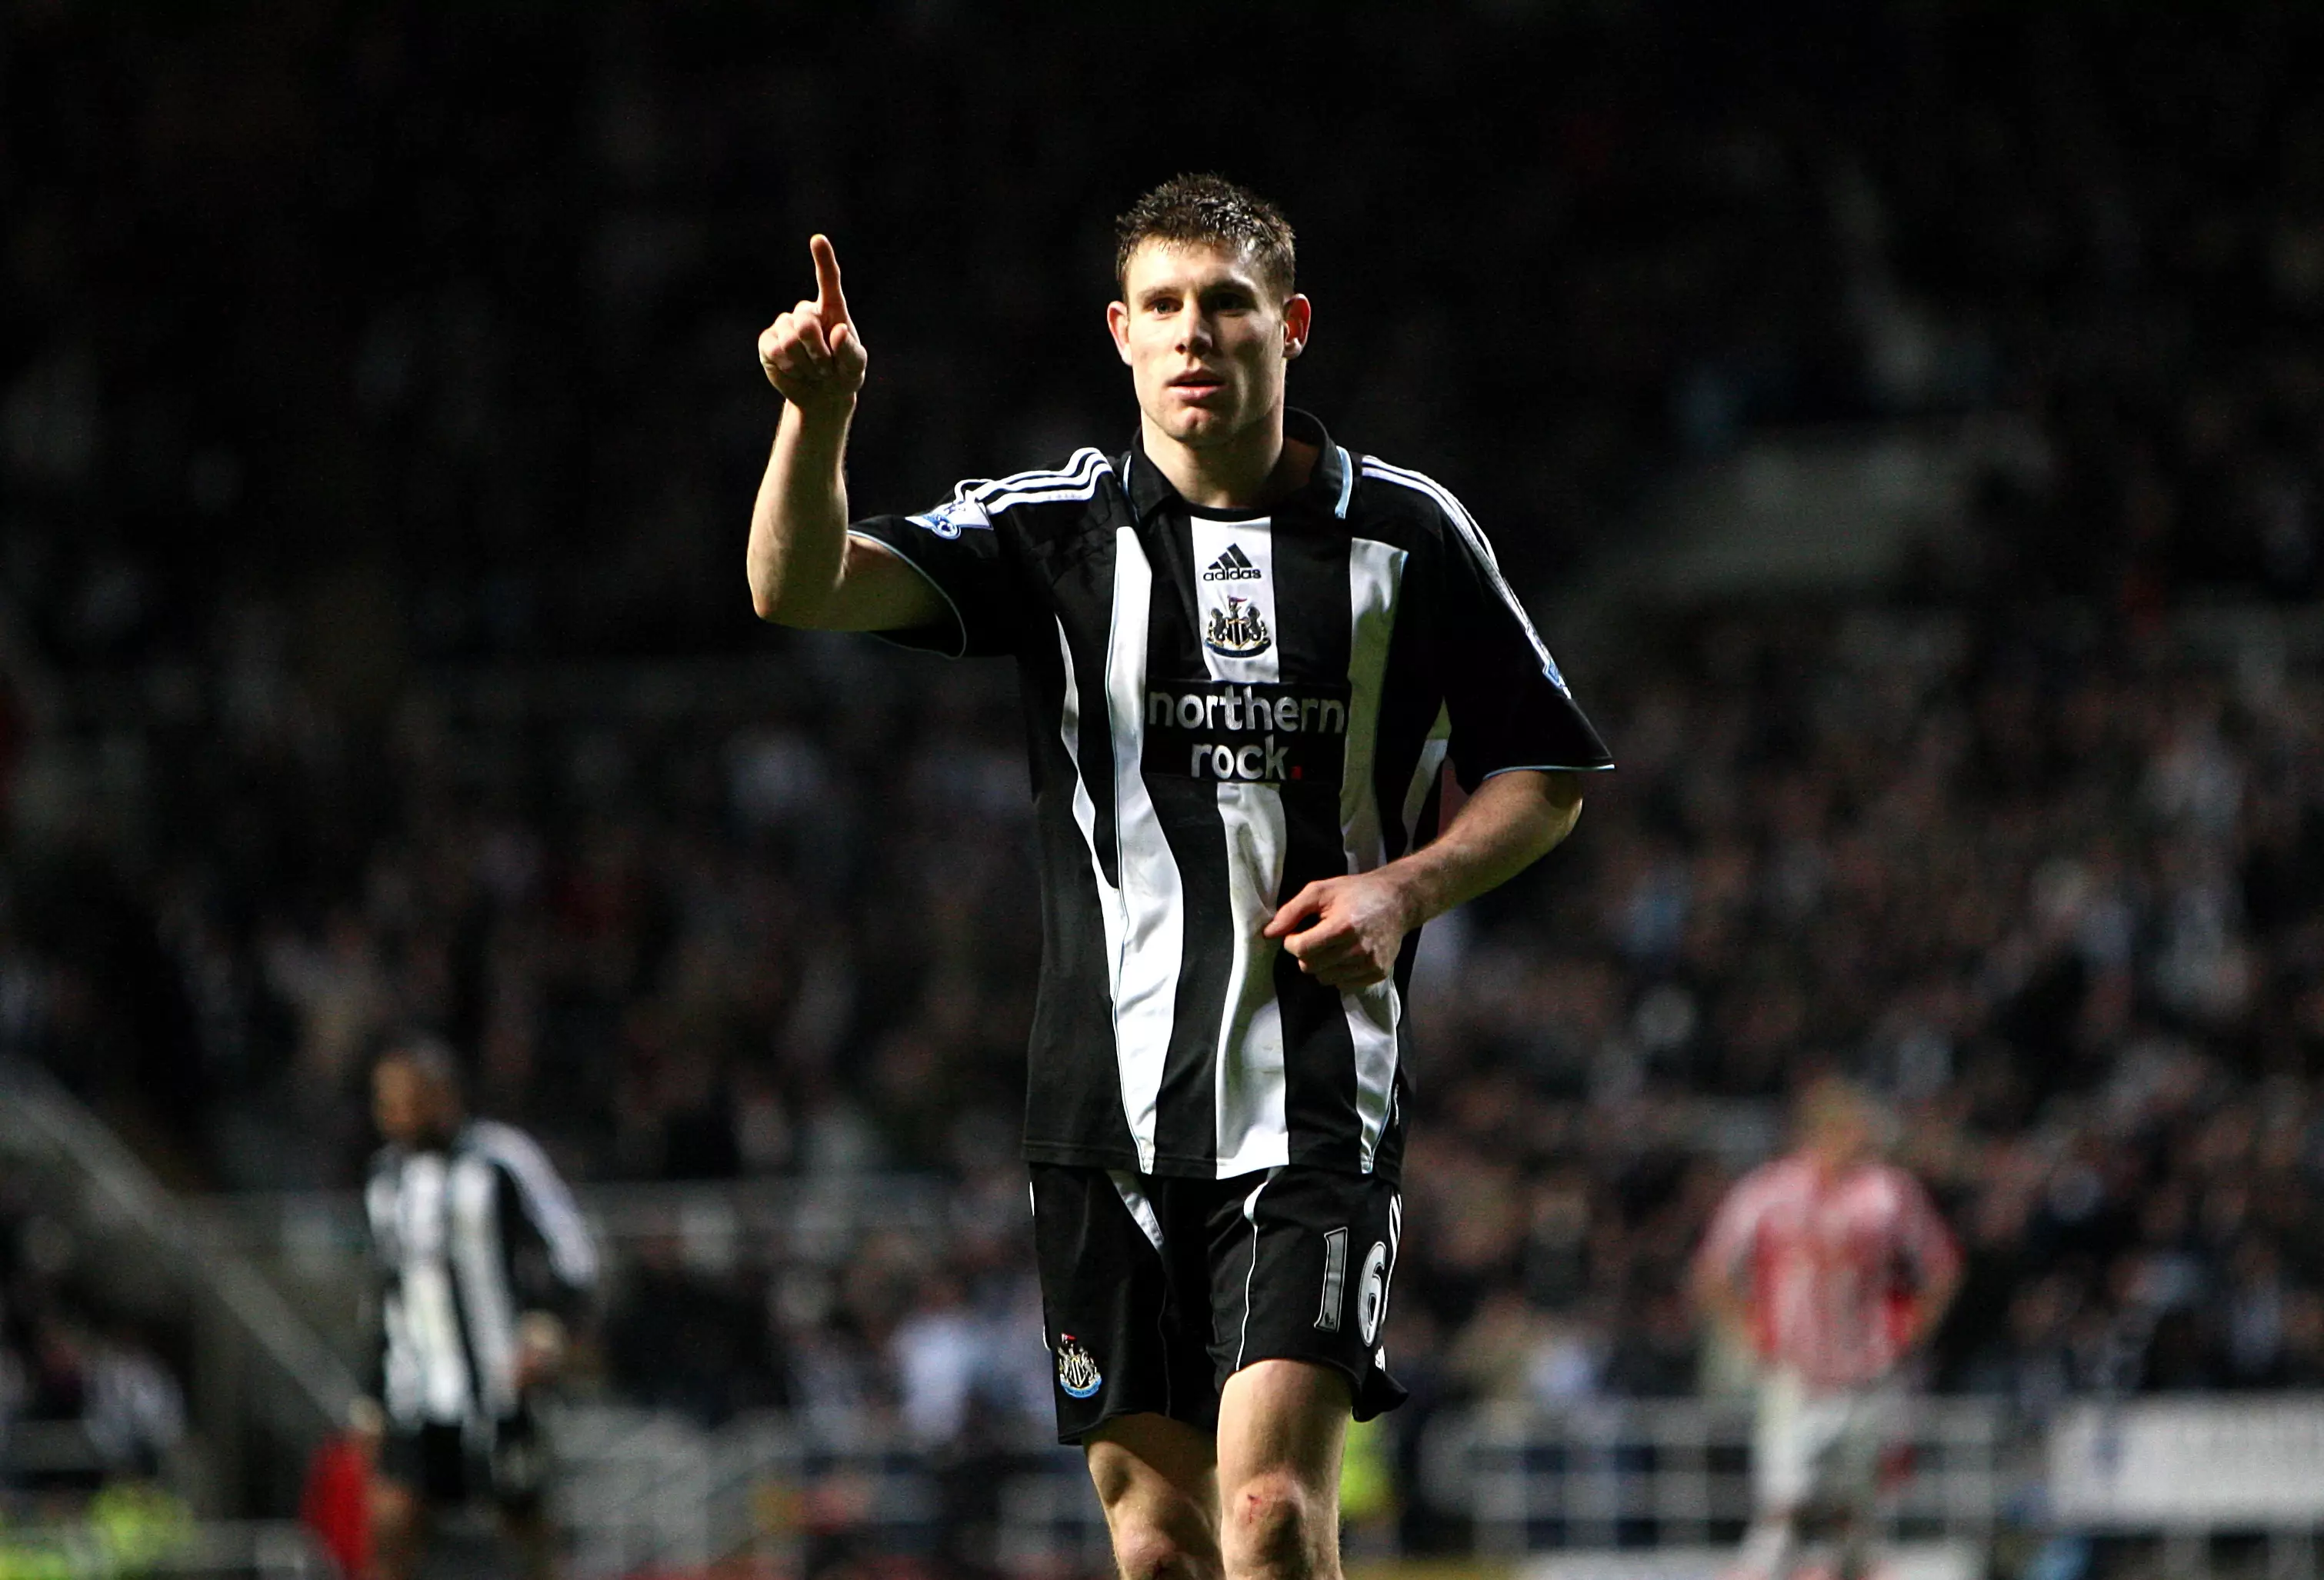 Former Newcastle Coach Says They Sold James Milner To Sign World Star